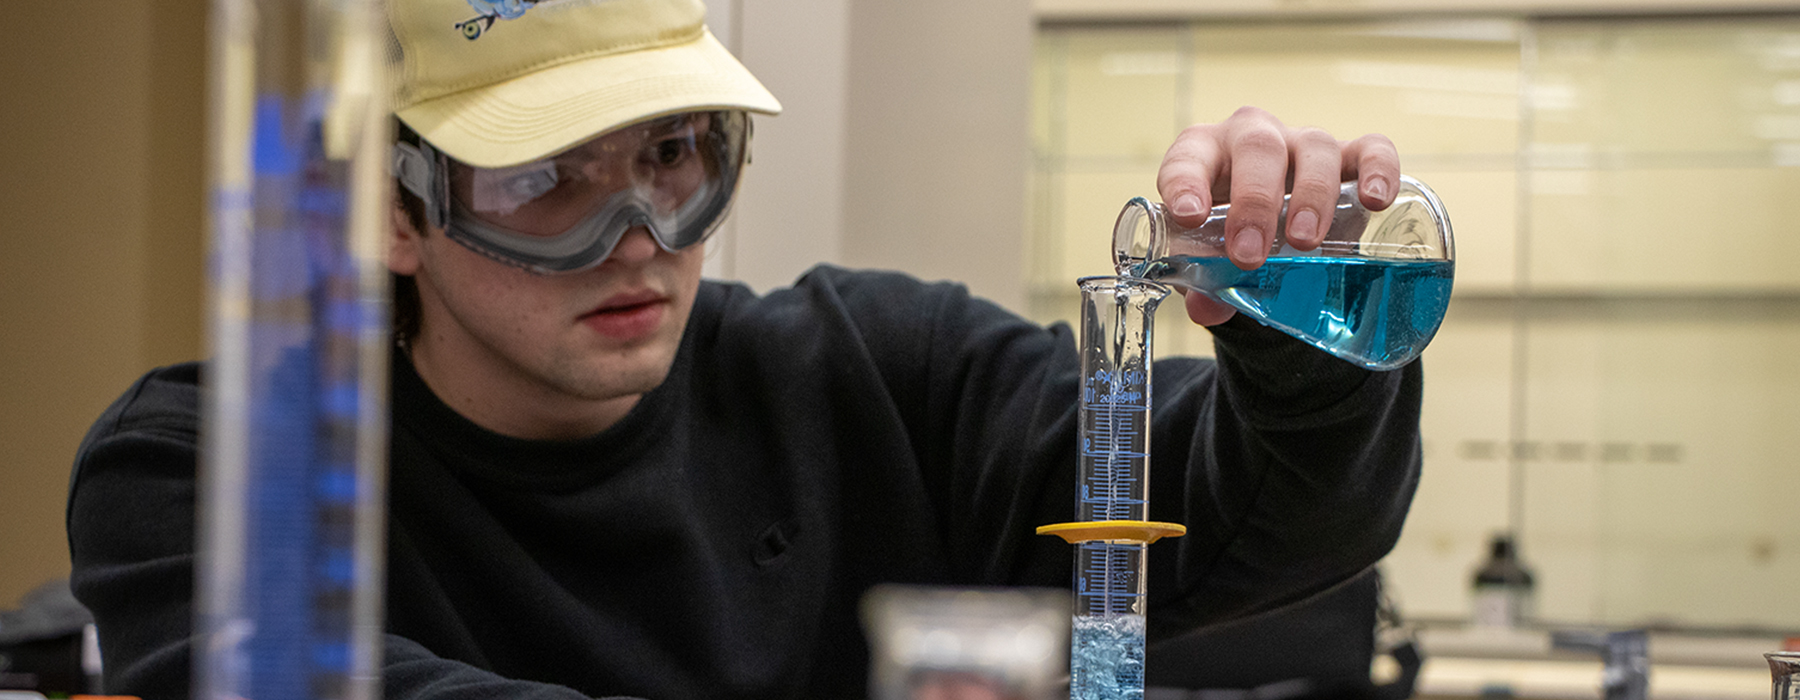 student pouring a blue liquid into a glass test tube